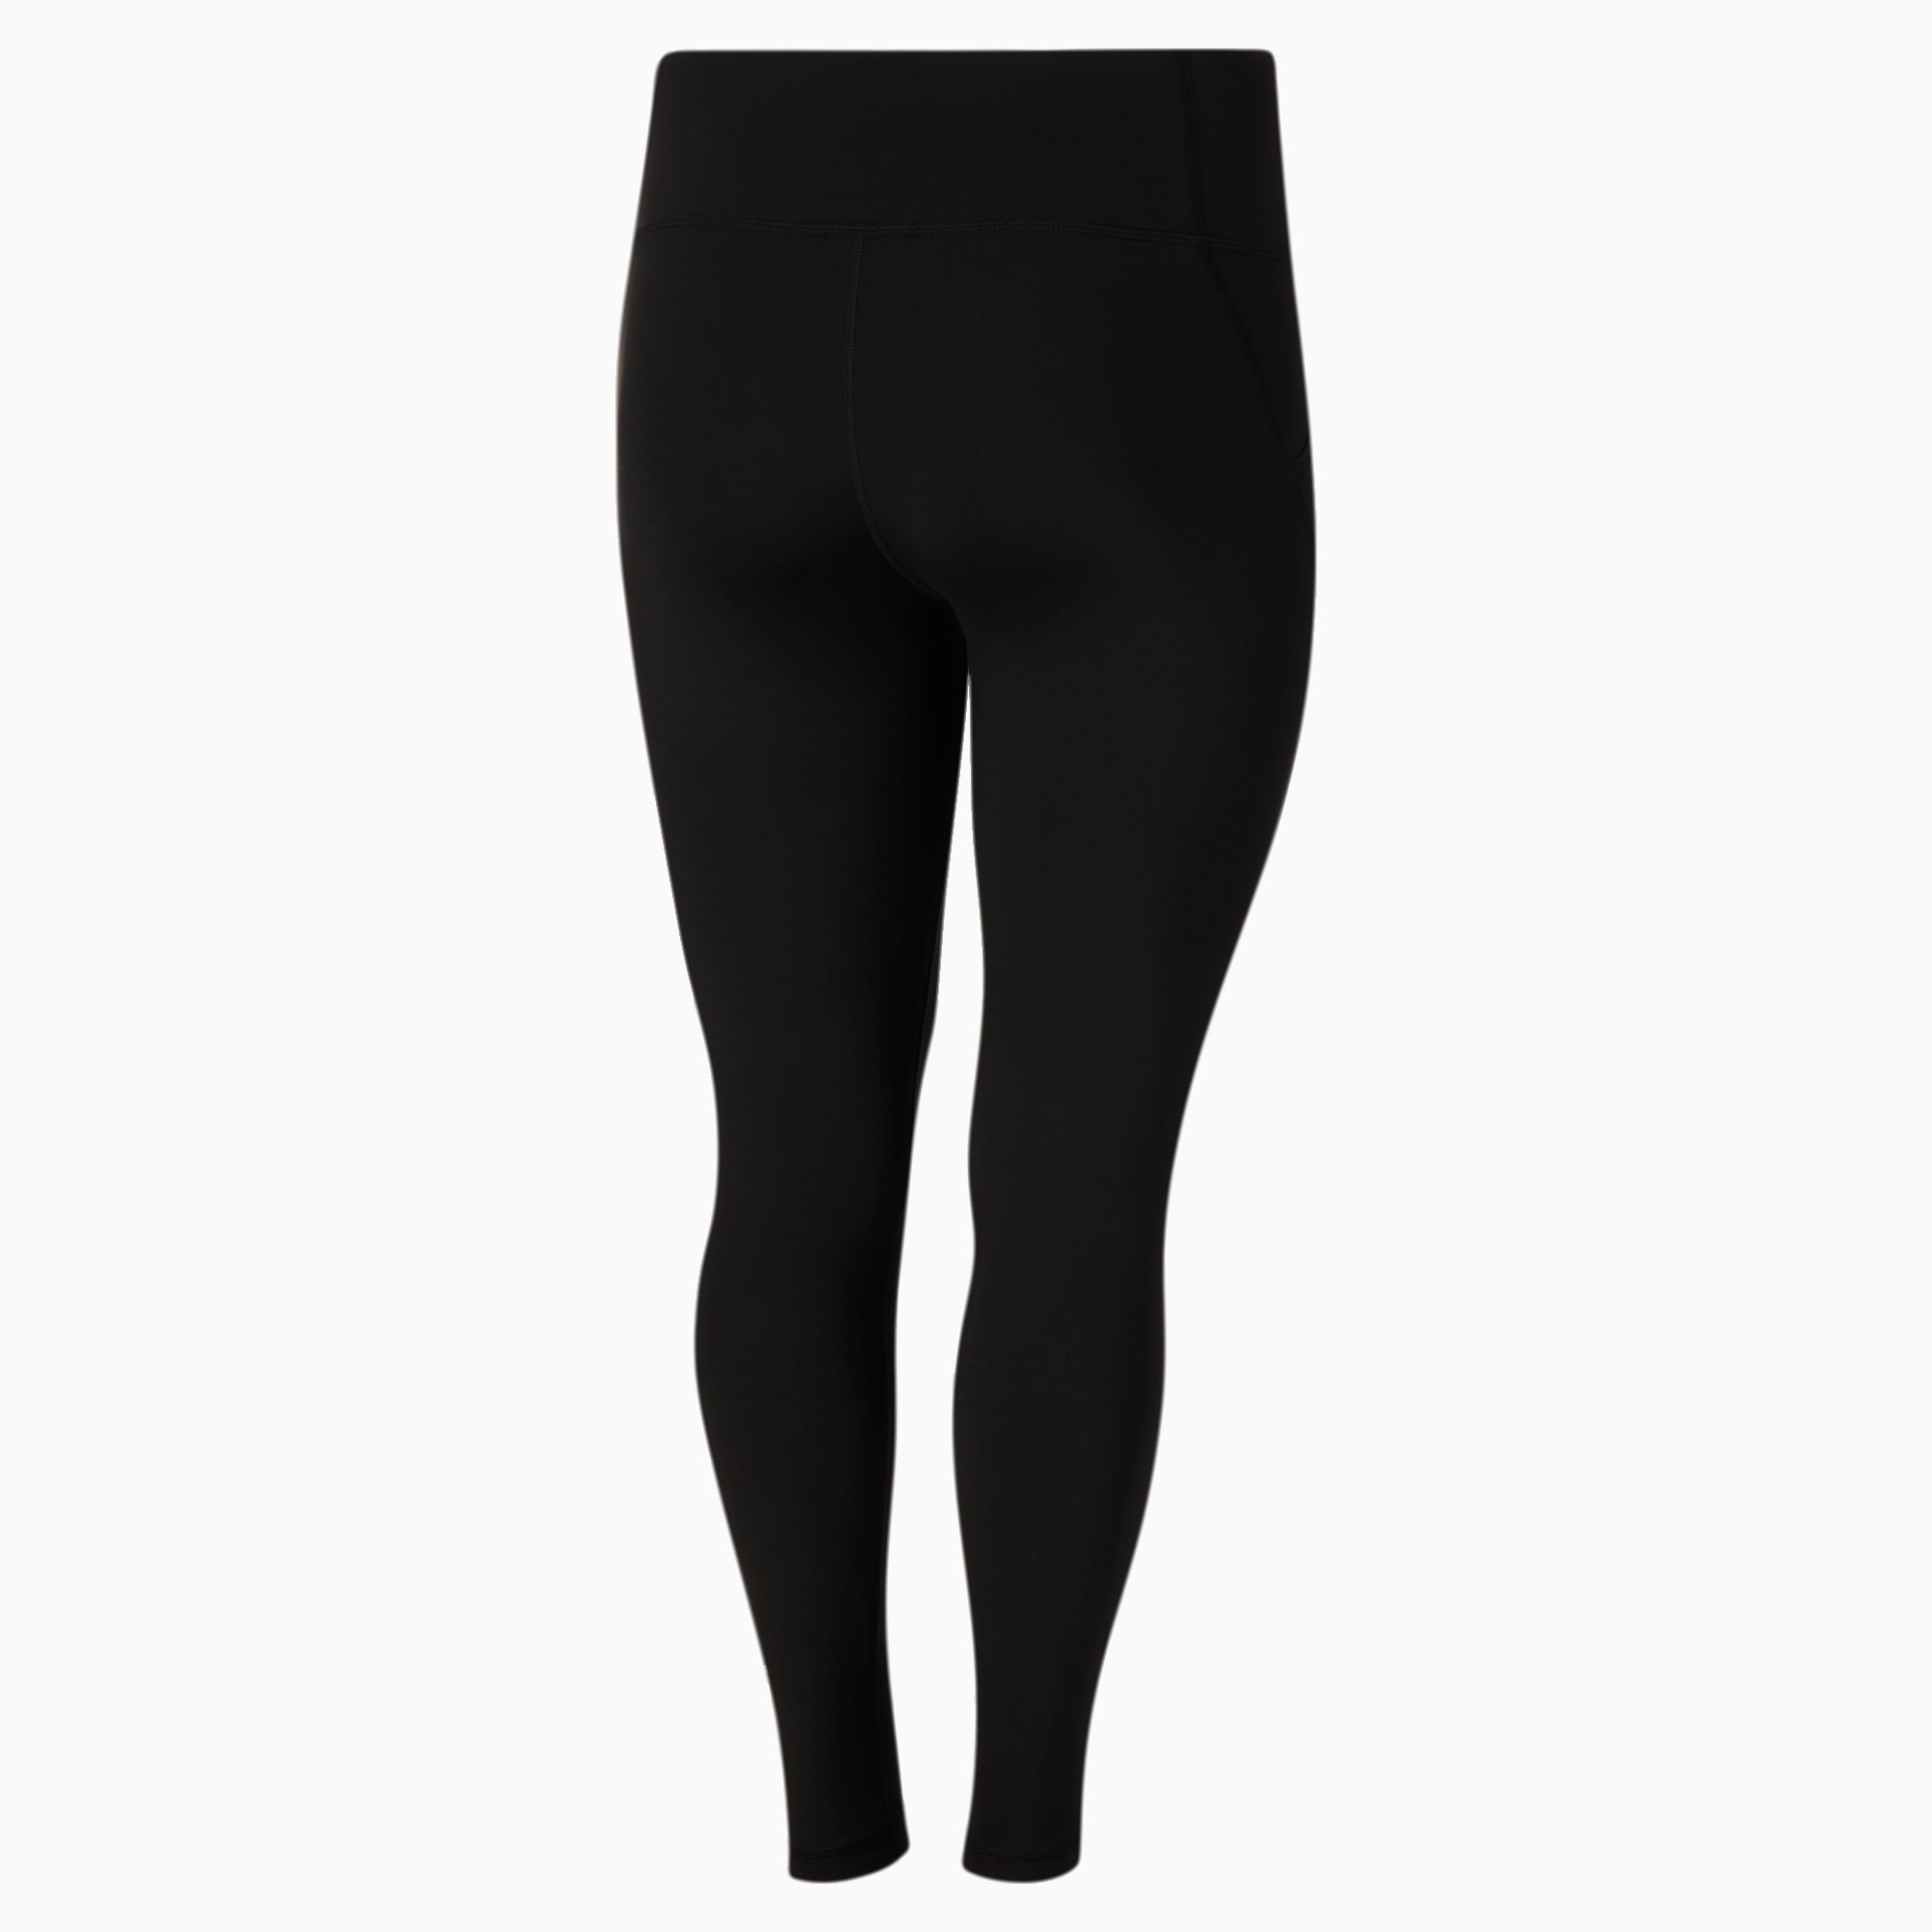 Buy Only Play onpSHINA AOP 7/8 TRAINING TIGHTS - Black, only play leggings  